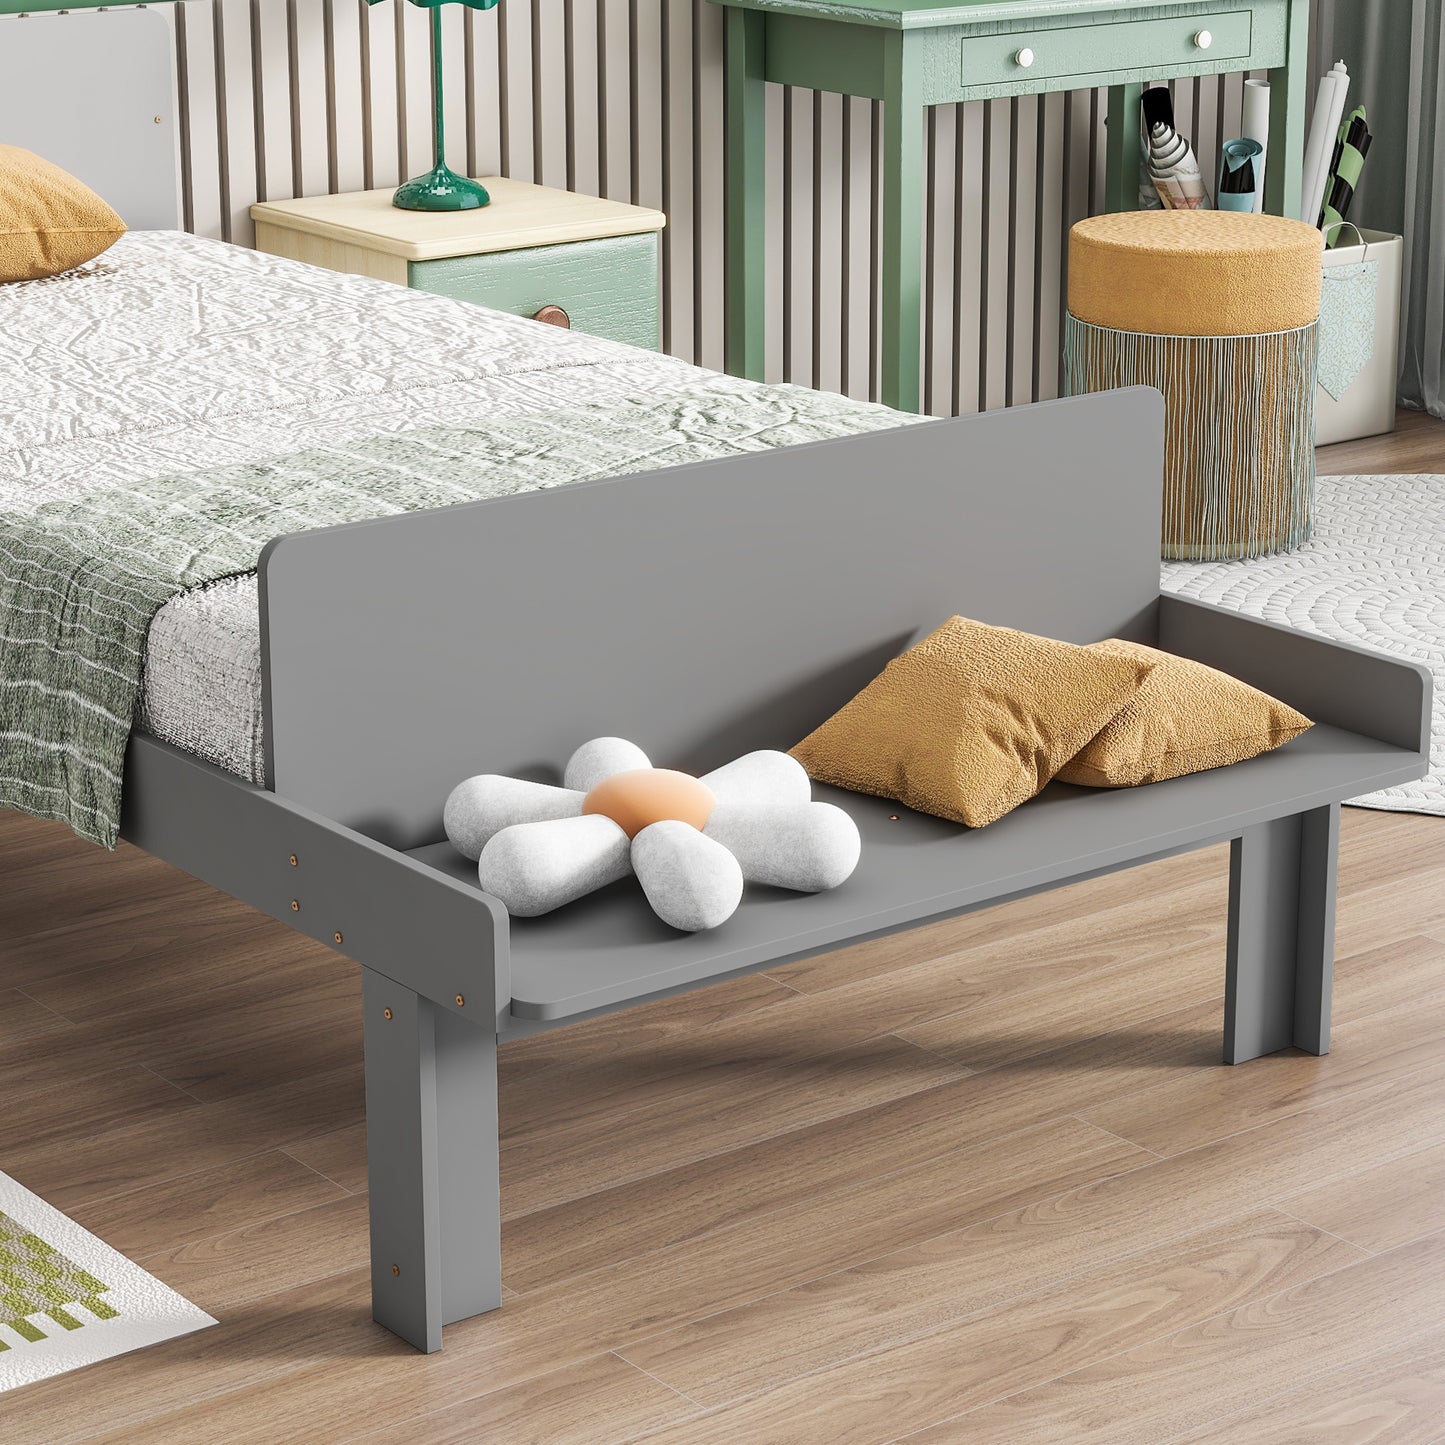 Kids Twin Size Bed, BTMWAY Twin Size Wood Platform Bed Frame with Footboard Bench, Wood Bed Frame for Kids, Modern Twin Platform Bed with Headboard and Slat Support